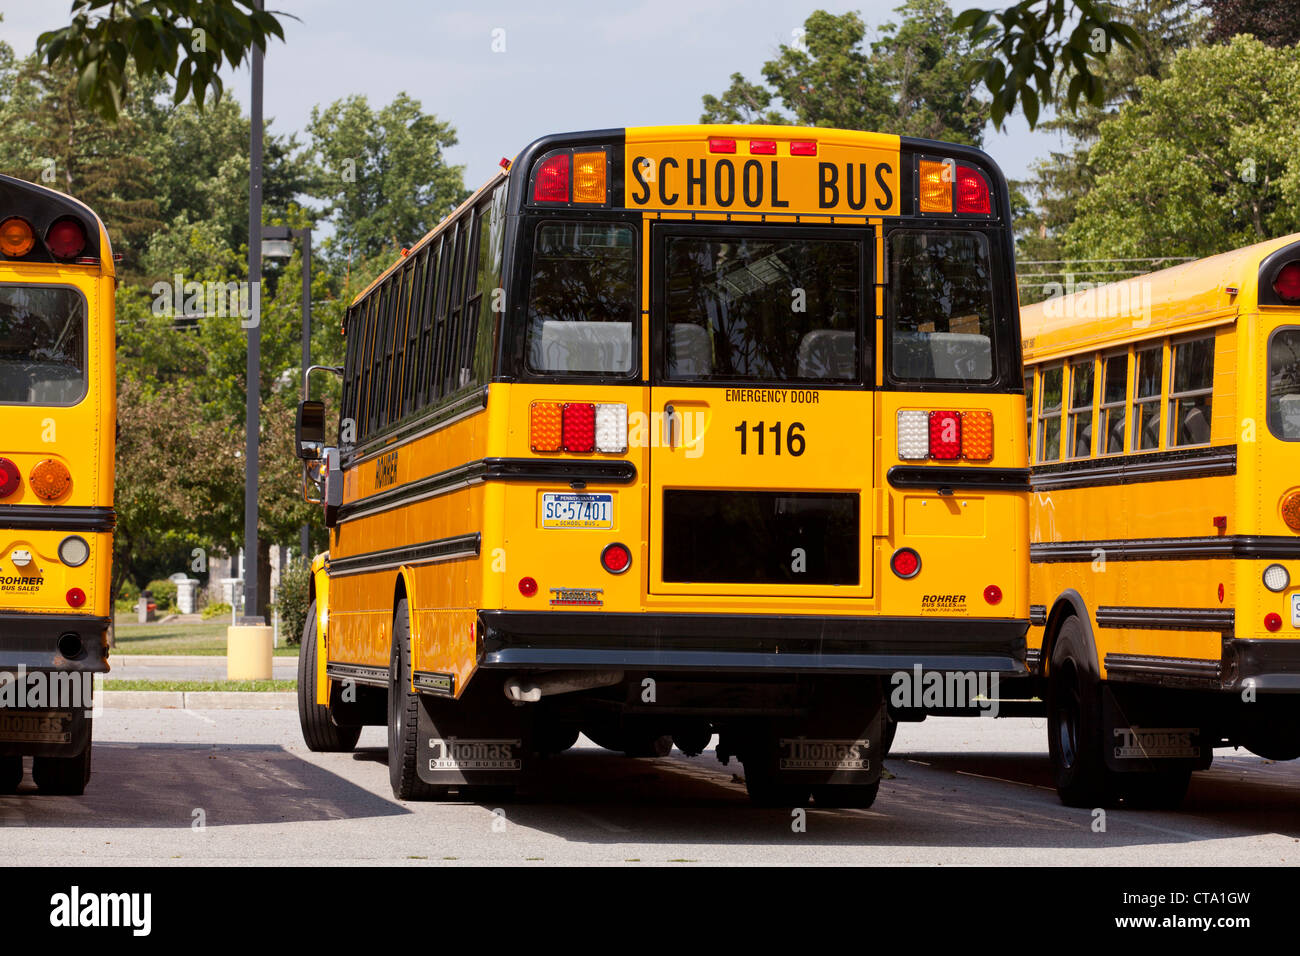 Rear view of school bus Stock Photo